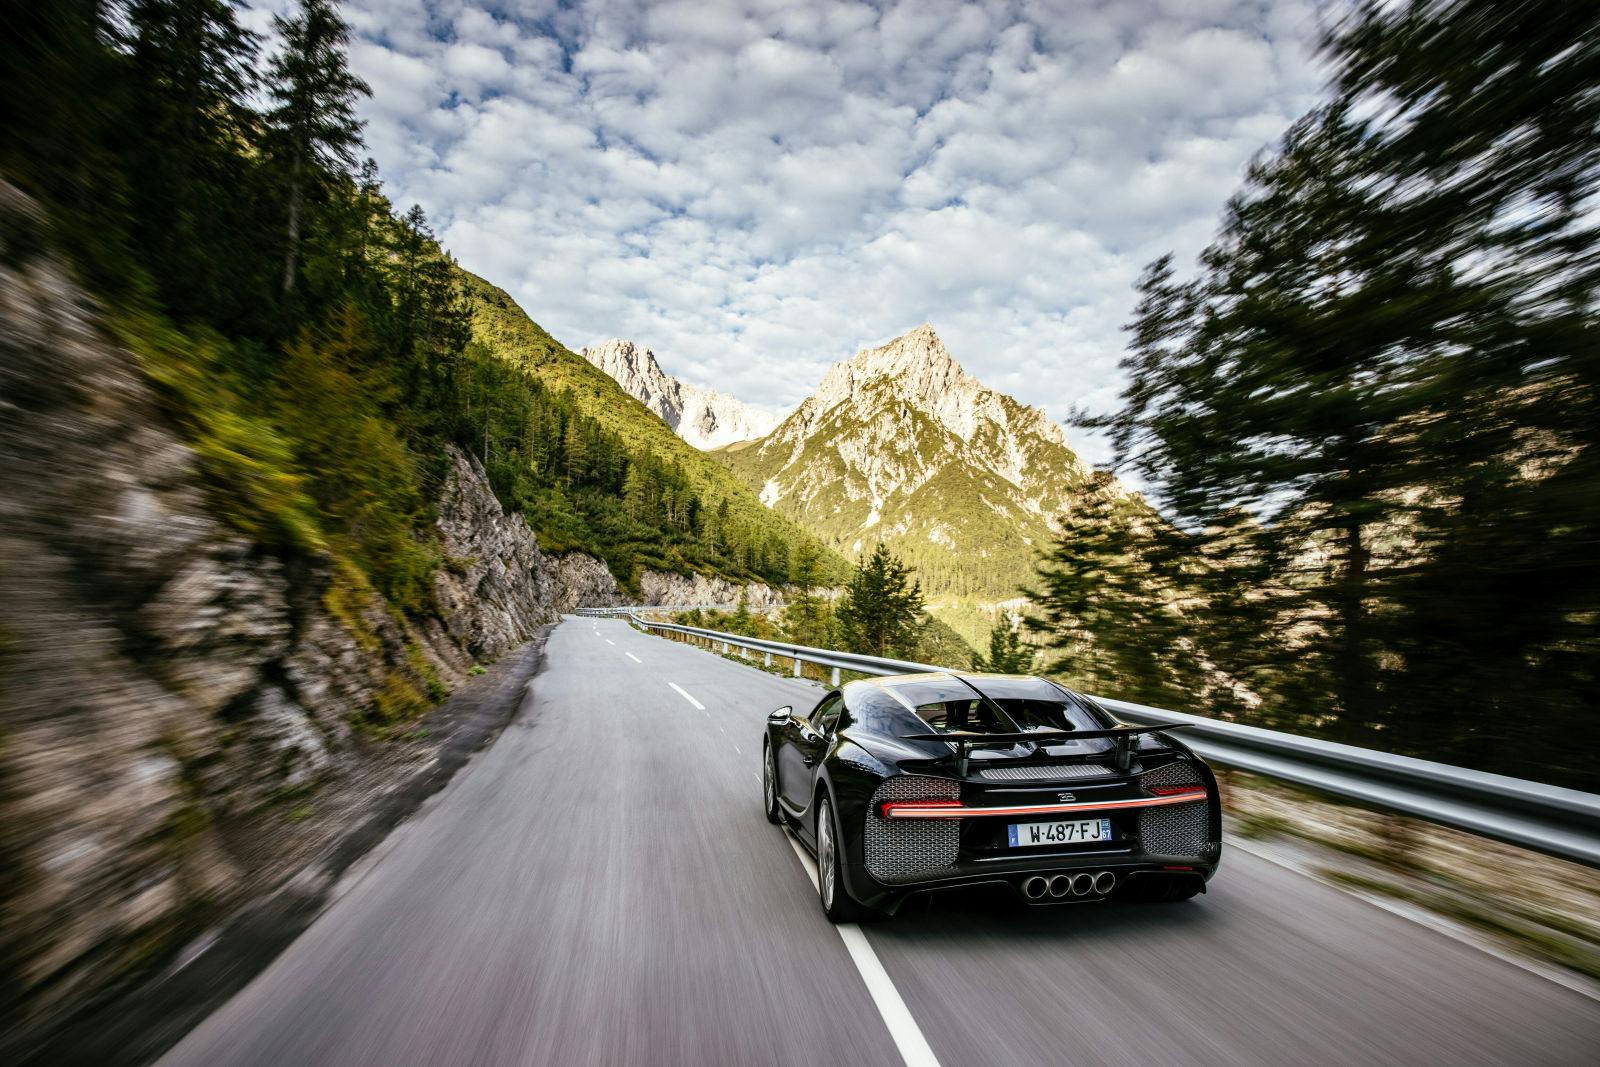 In the sovereign manner of a Grand Tourer the Bugatti Chiron Sport traverses Austria's breathtaking mountain landscapes.